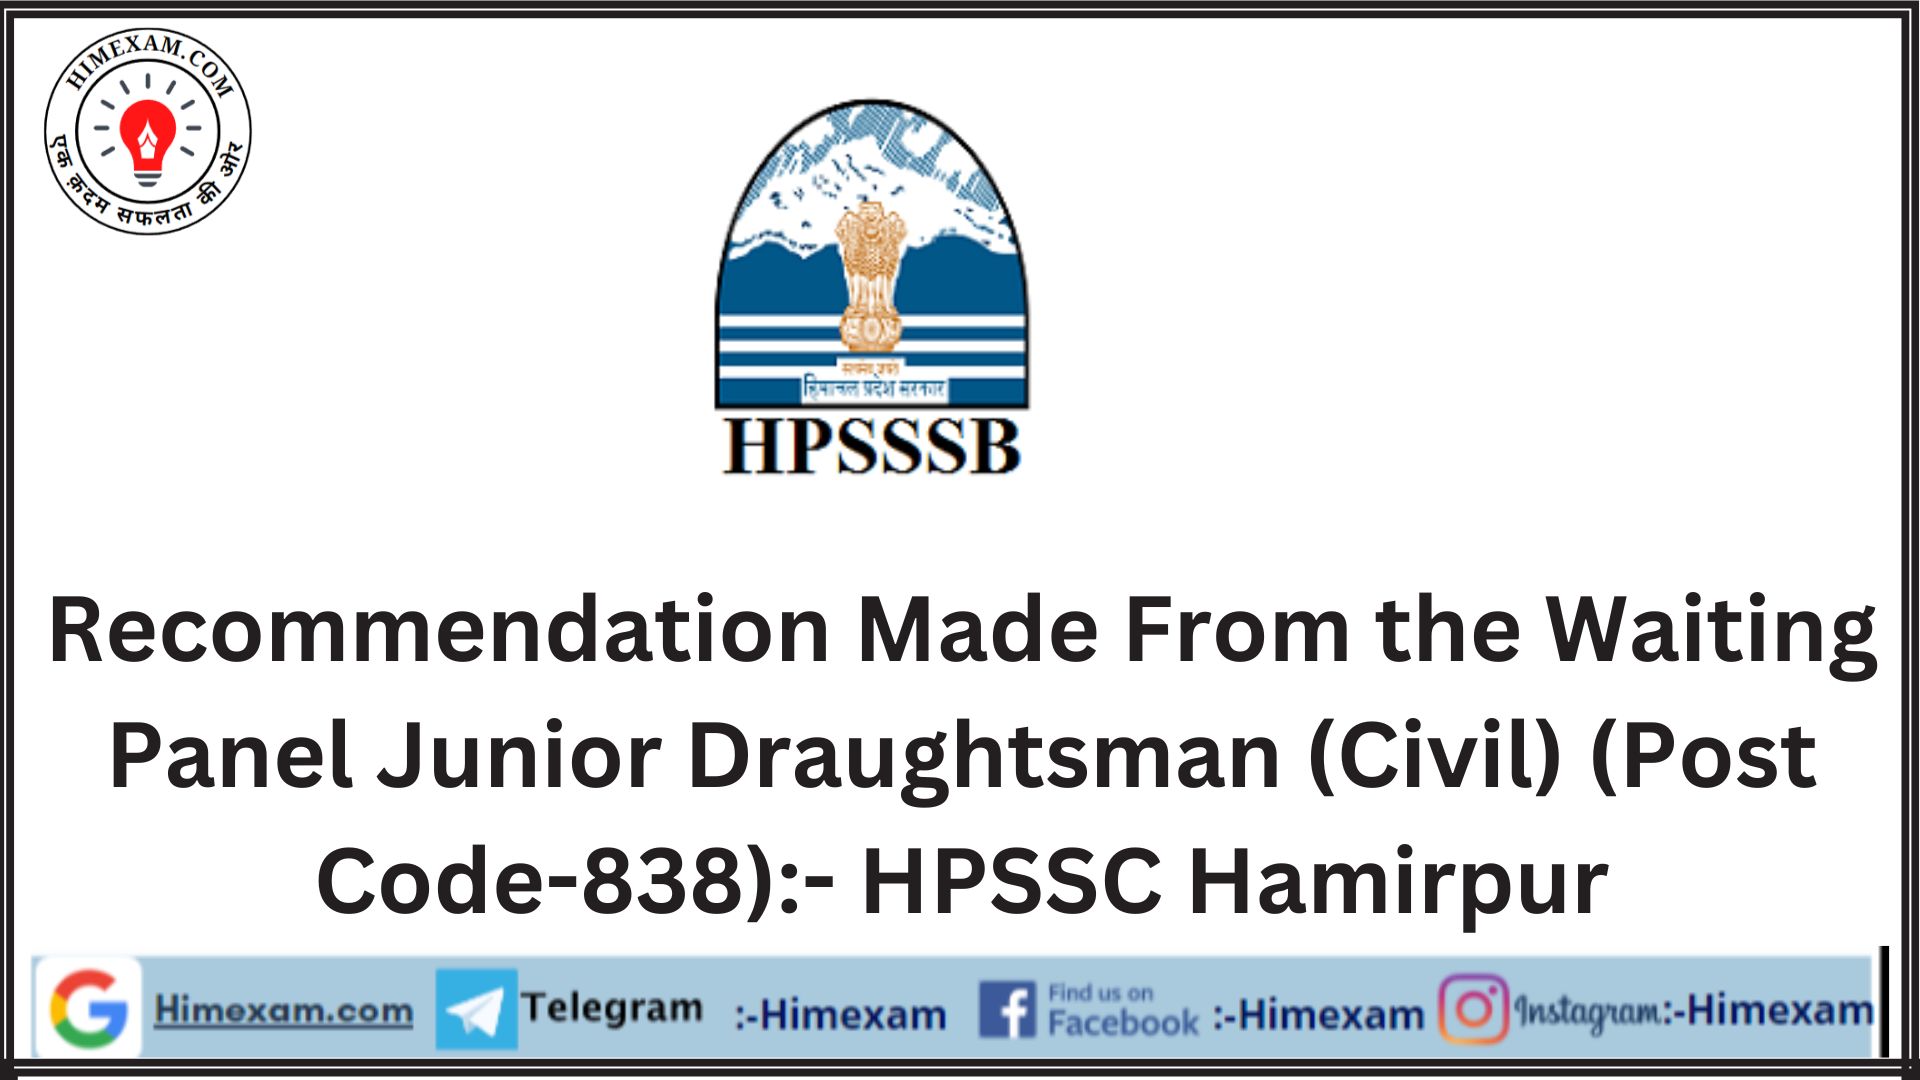 Recommendation Made From the Waiting Panel  Junior Draughtsman (Civil) (Post Code-838):- HPSSC Hamirpur